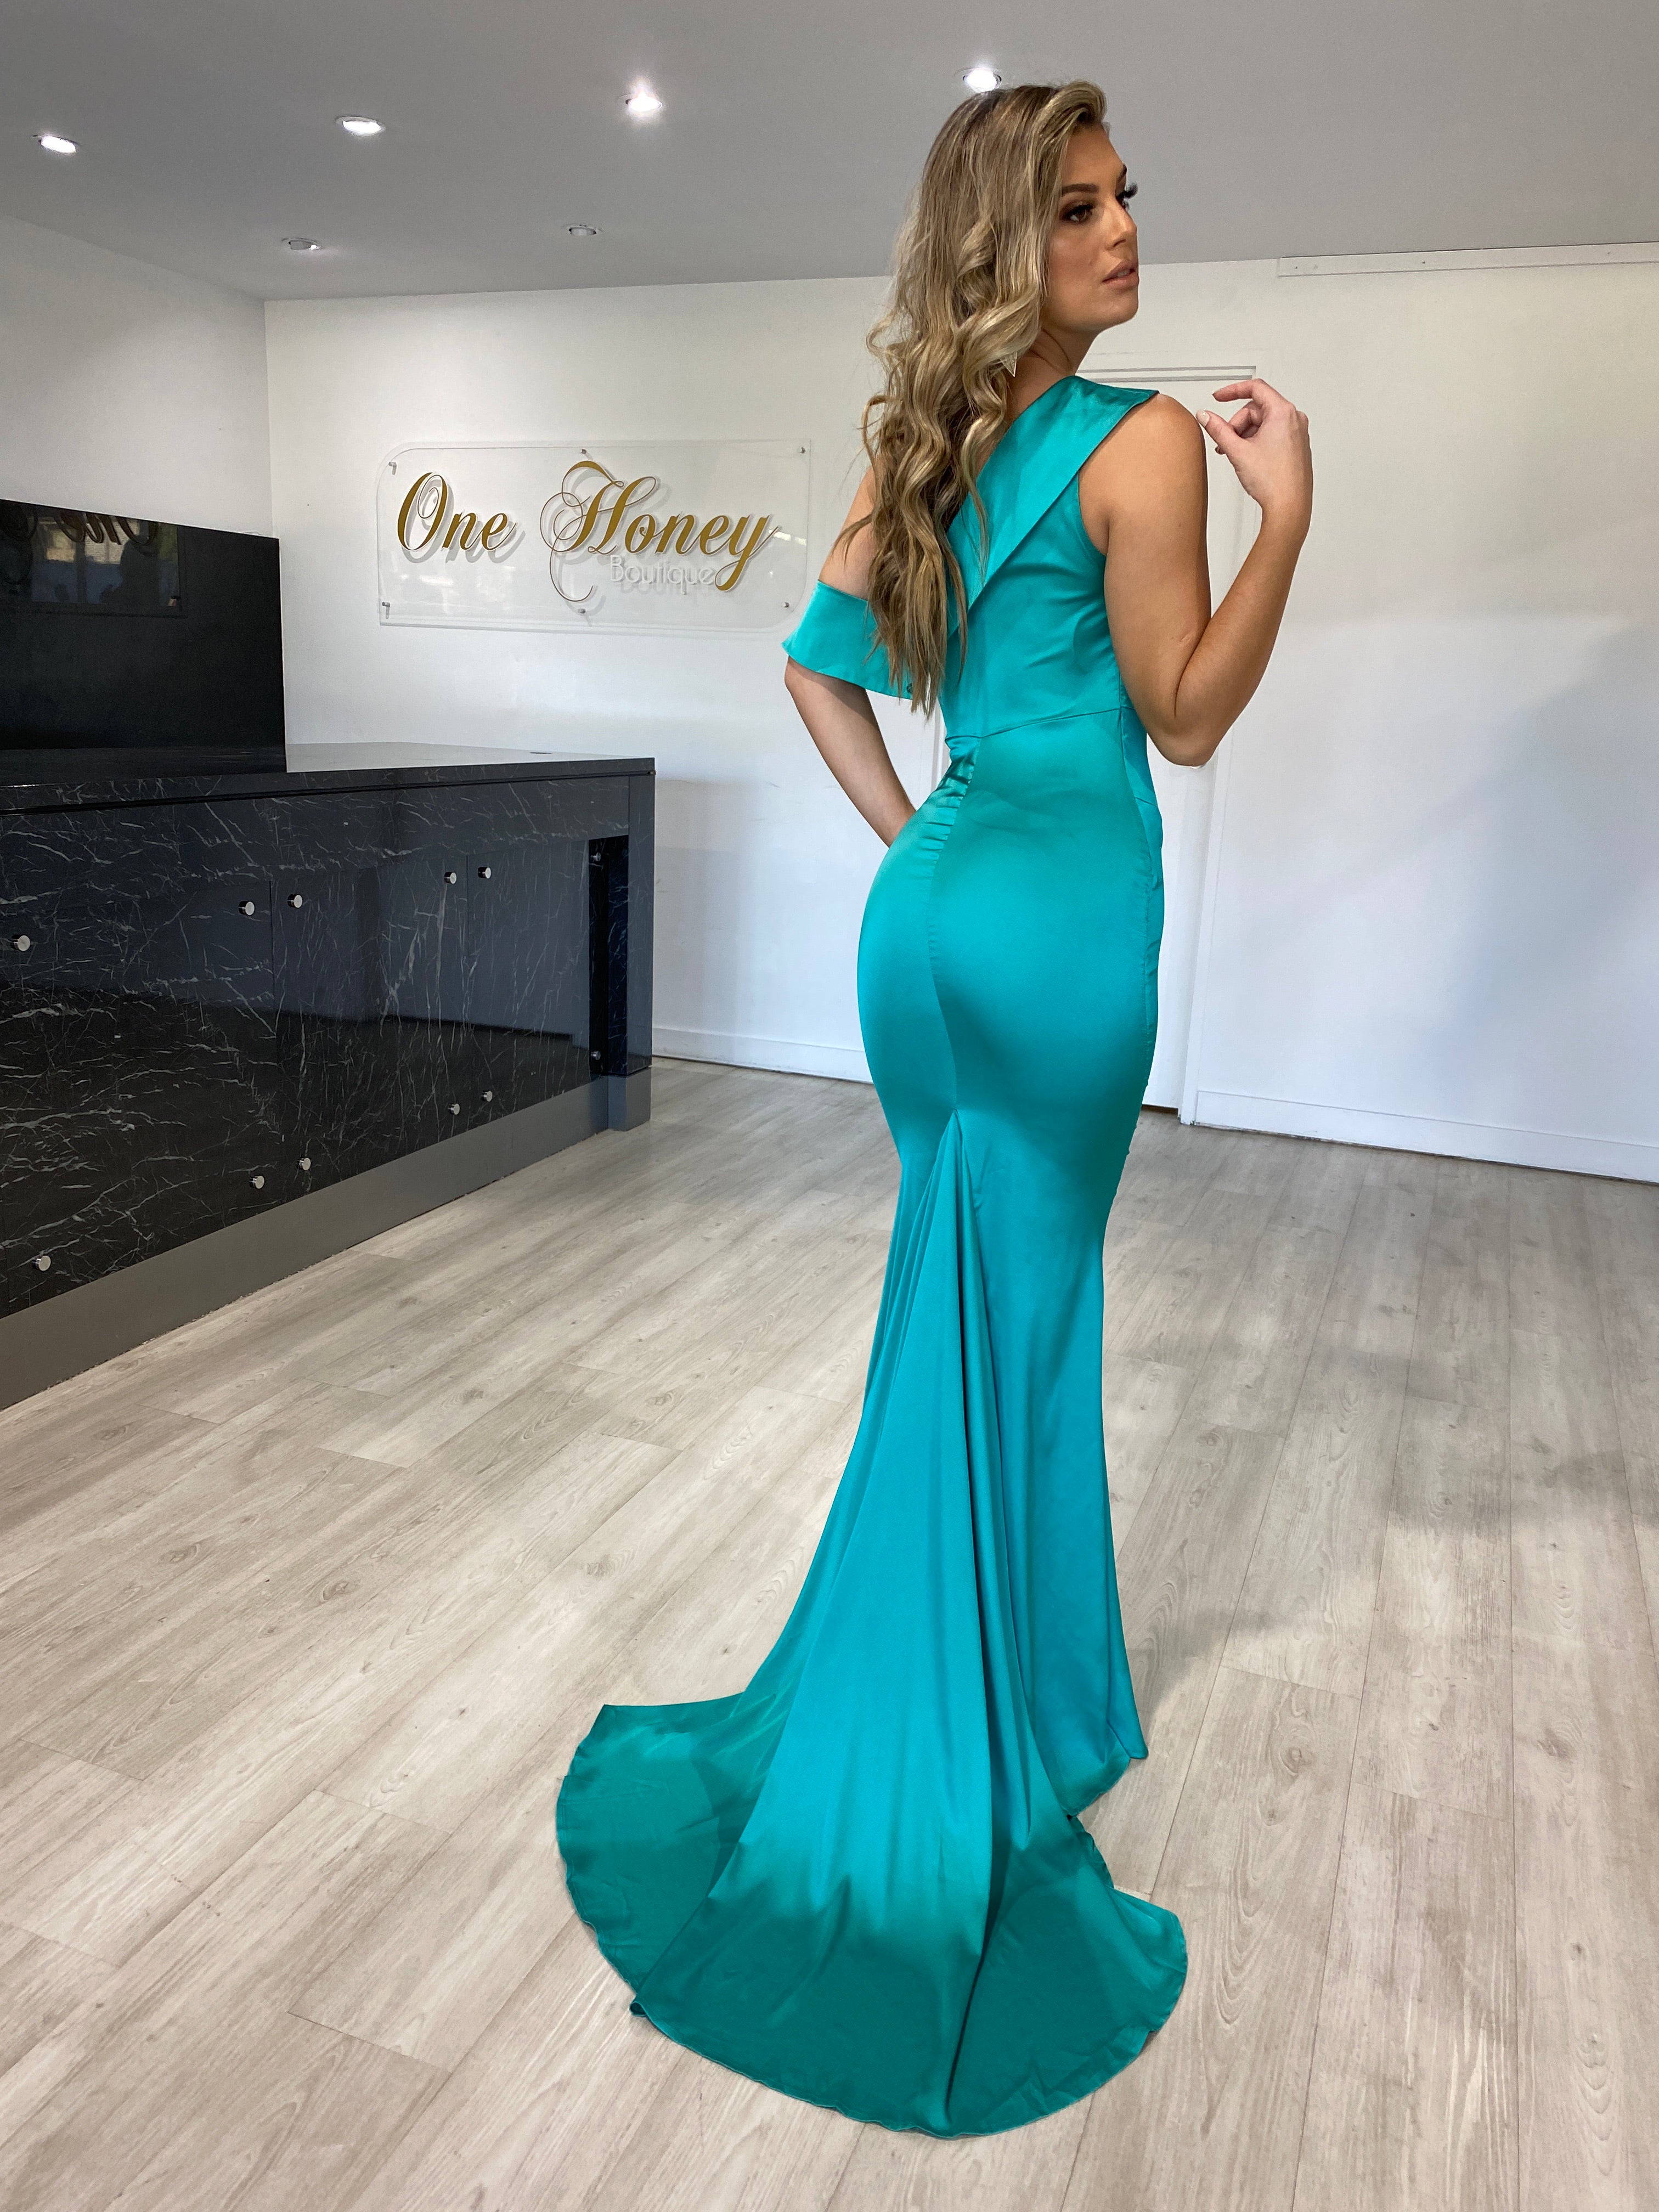 Honey Couture MEL Teal Green One Shoulder Frilly Satin Mermaid Gown